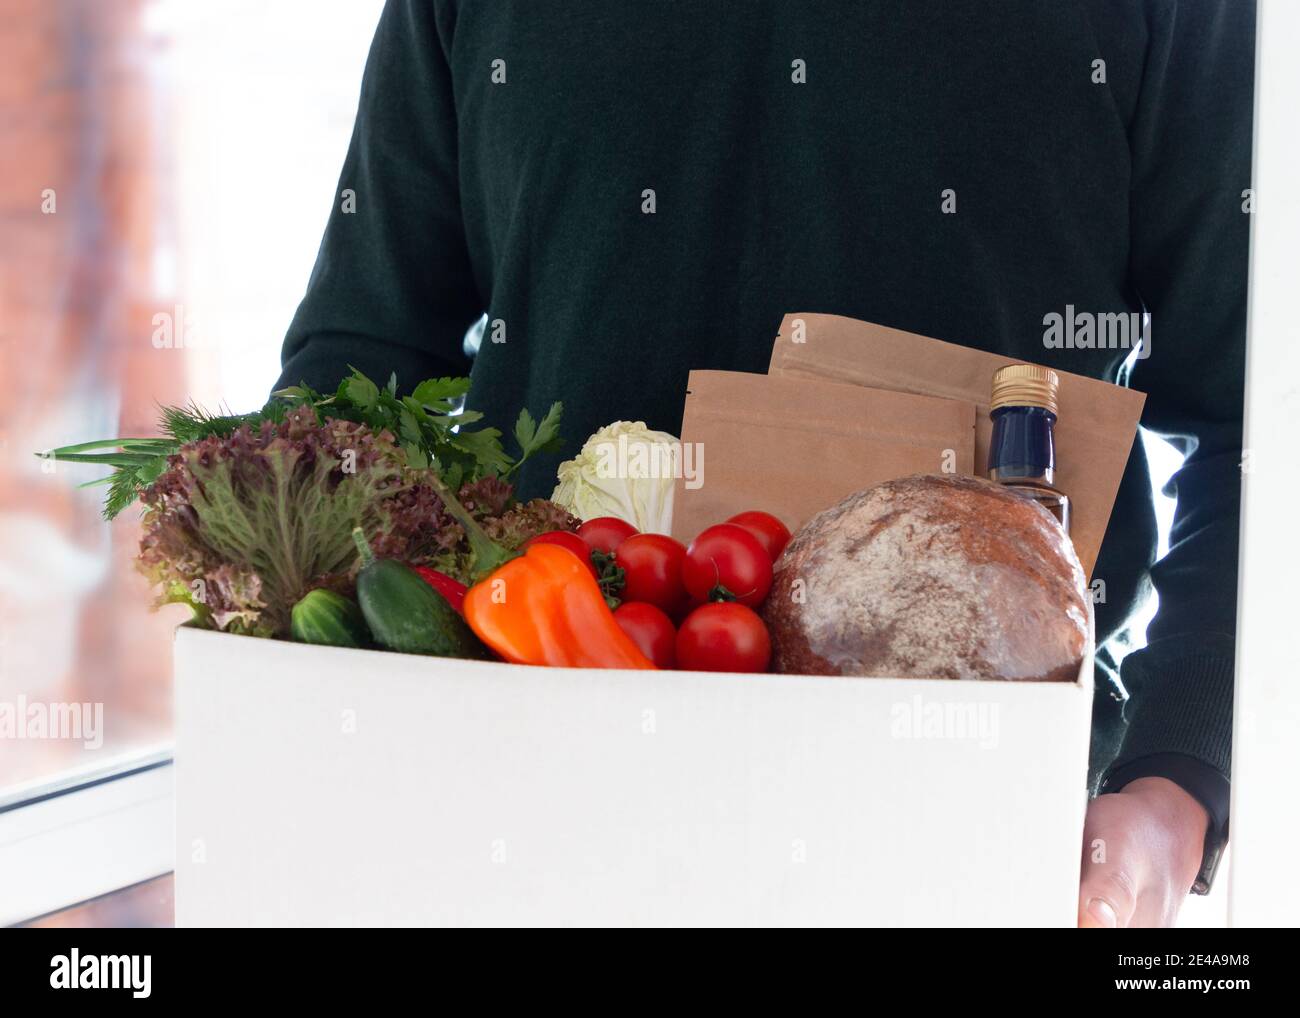 A person delivering box with farmer bio crop in the house doorway. Fresh organic greens and vegetables delivery. Small local business support. Stock Photo